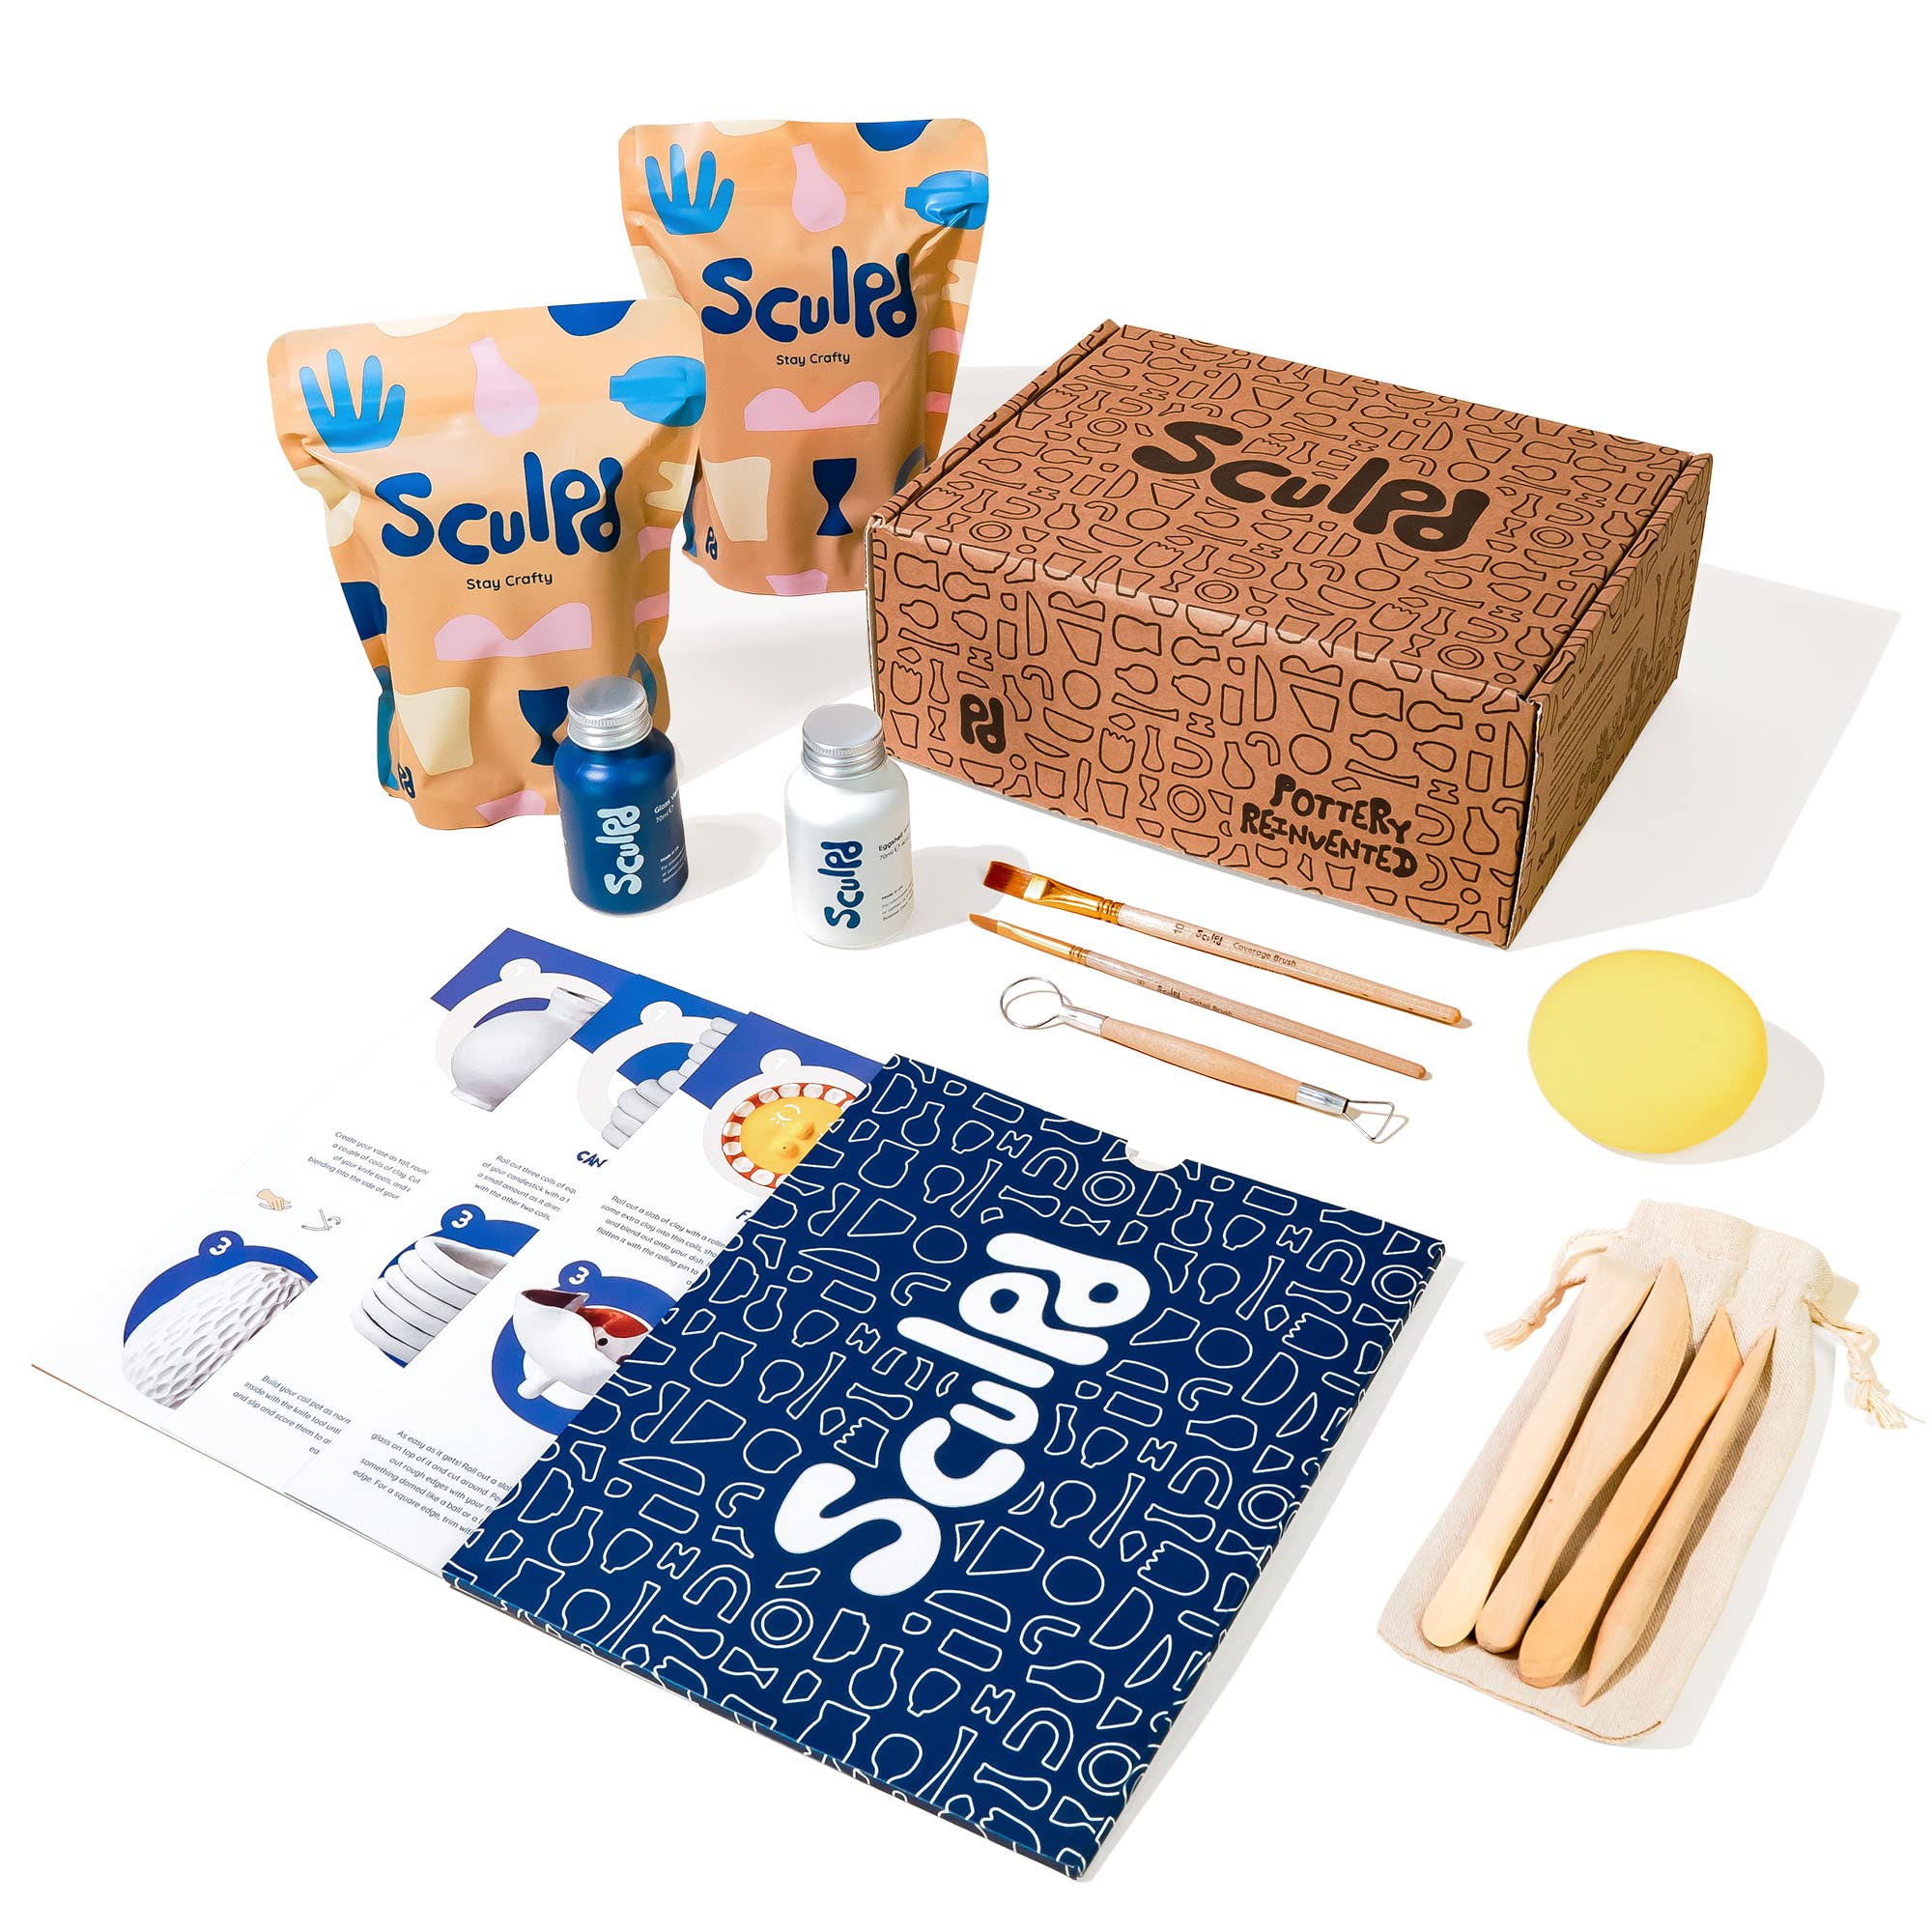 Sculpd Pottery Kit, Air Dry Clay Starter Kit for Beginners with